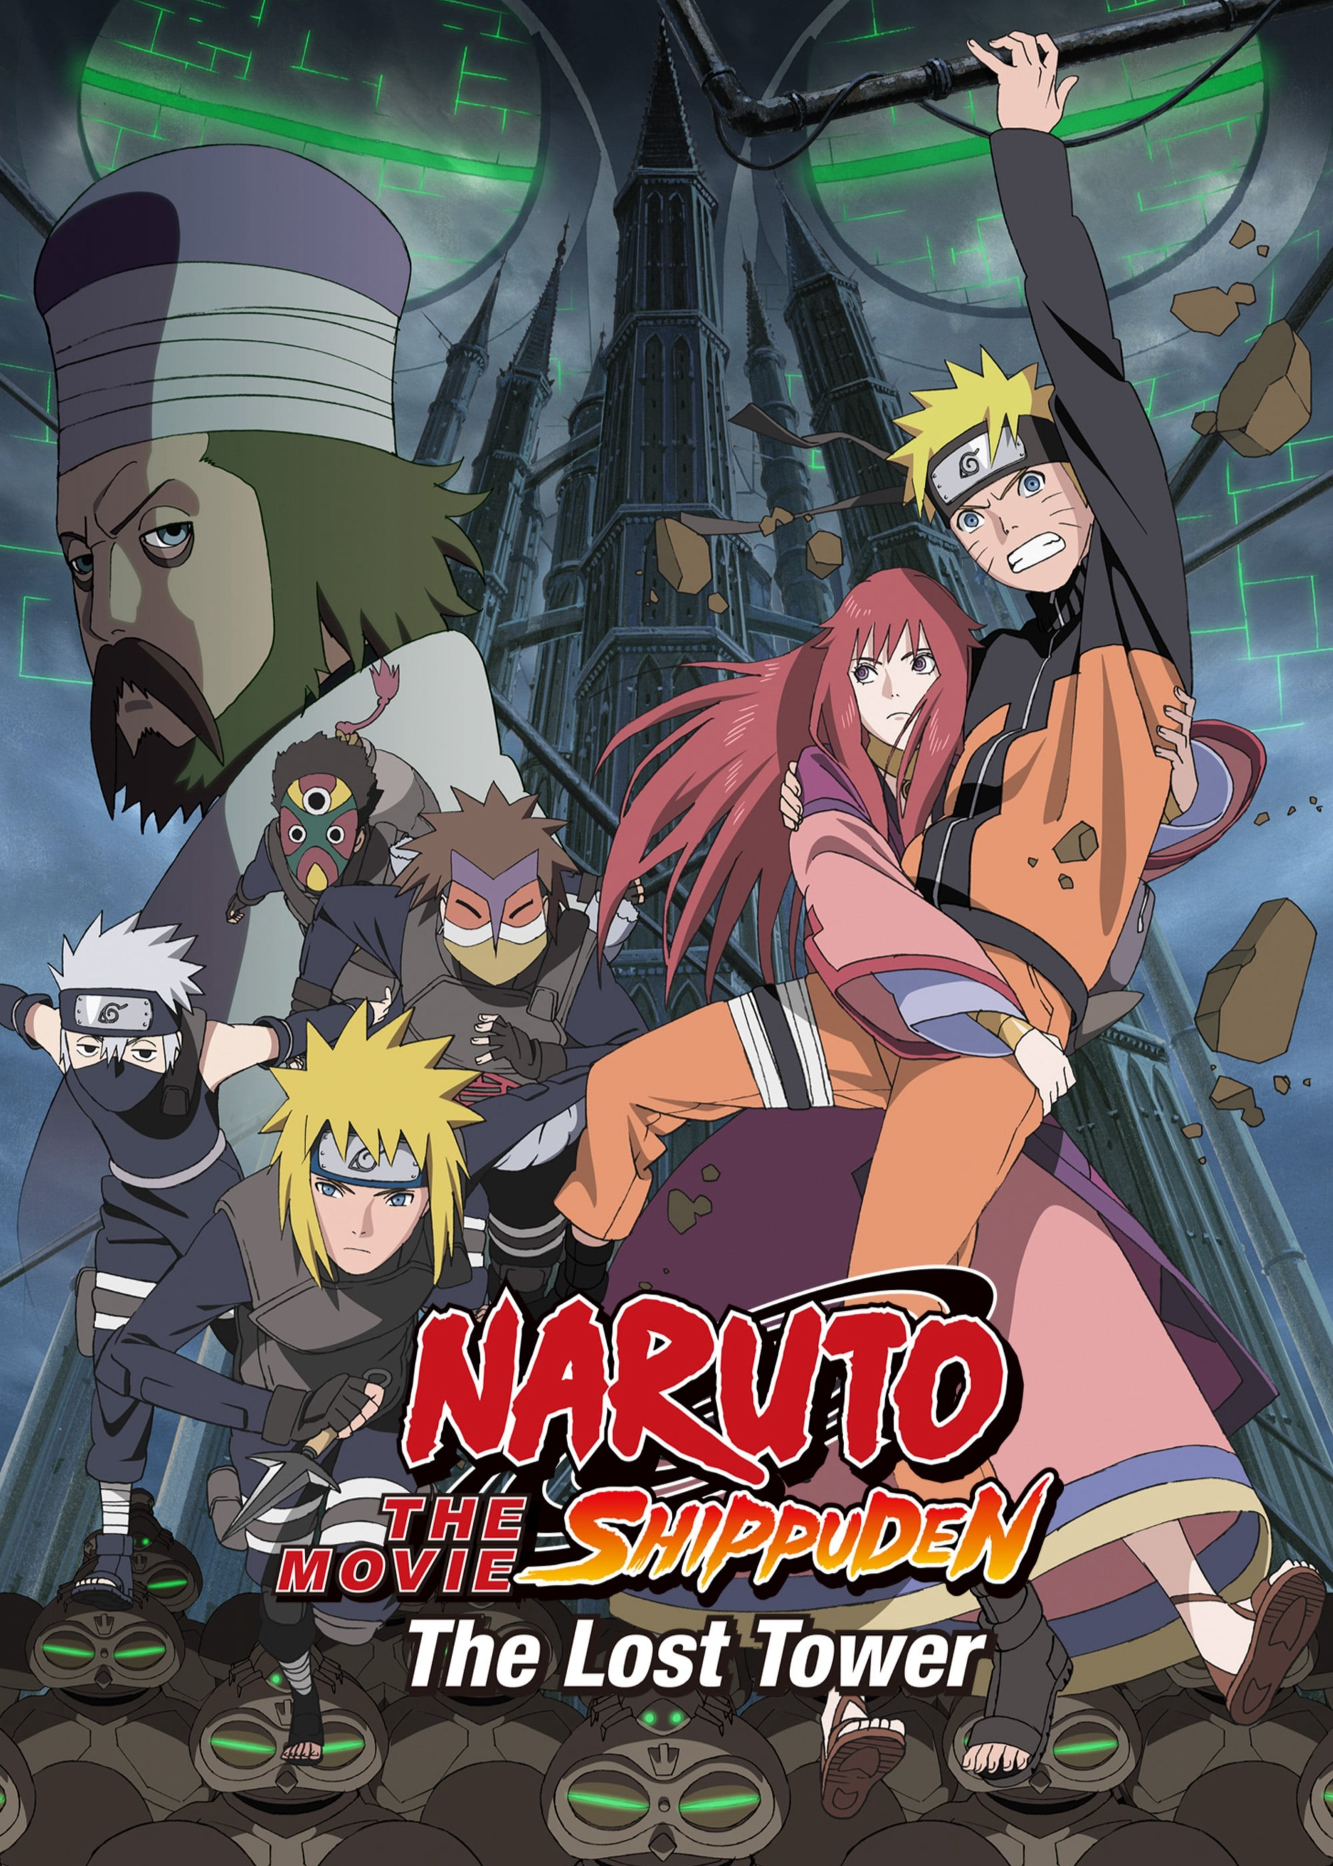 Poster Phim Naruto Shippuden: The Lost Tower (Naruto Shippuden: The Lost Tower)